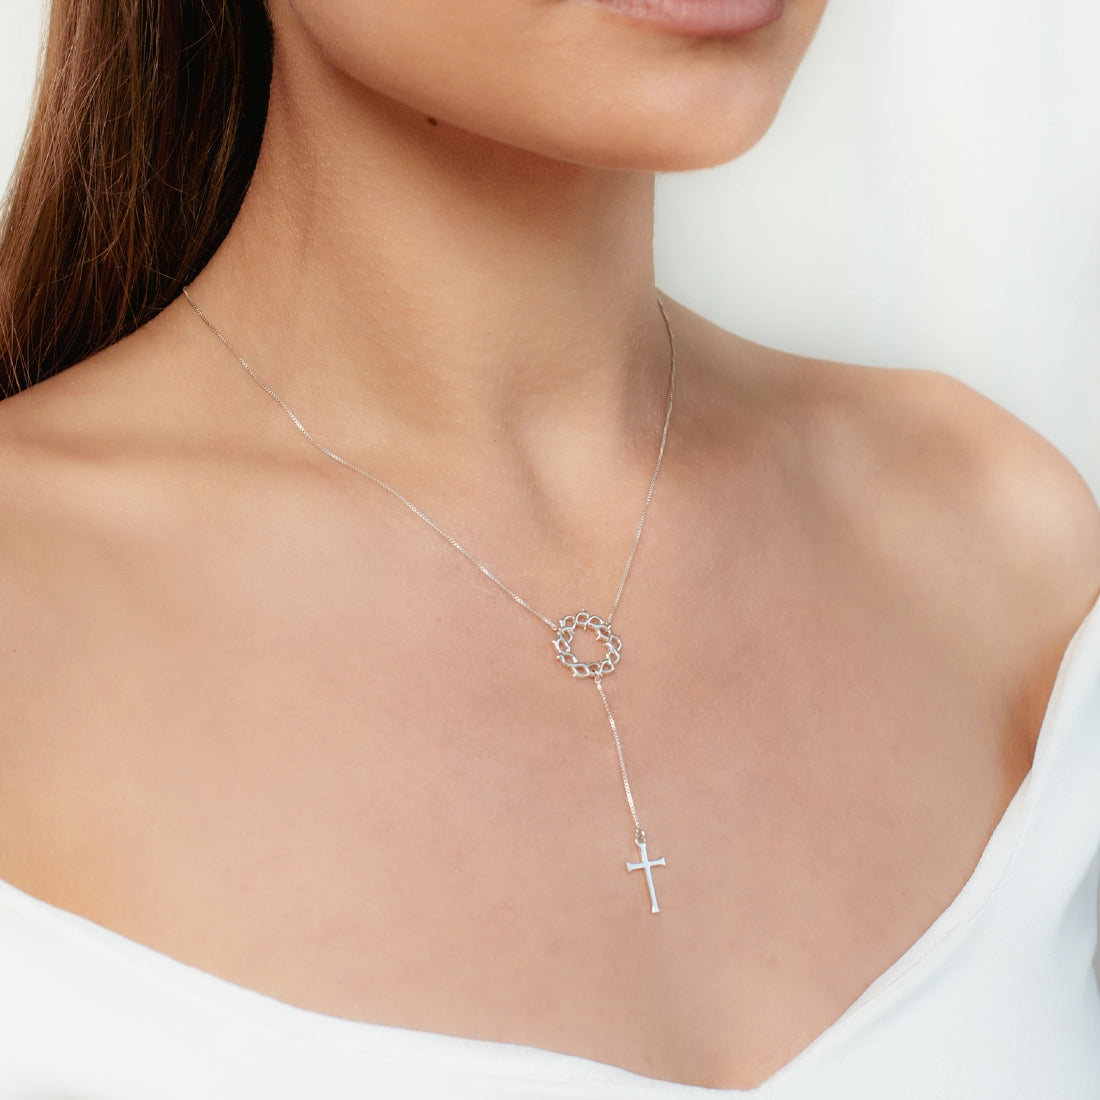 Christian woman wearing the sterling silver Crown of Thorns Y Necklace with cross pendant from the Insignia Collection by Rizen Jewelry.